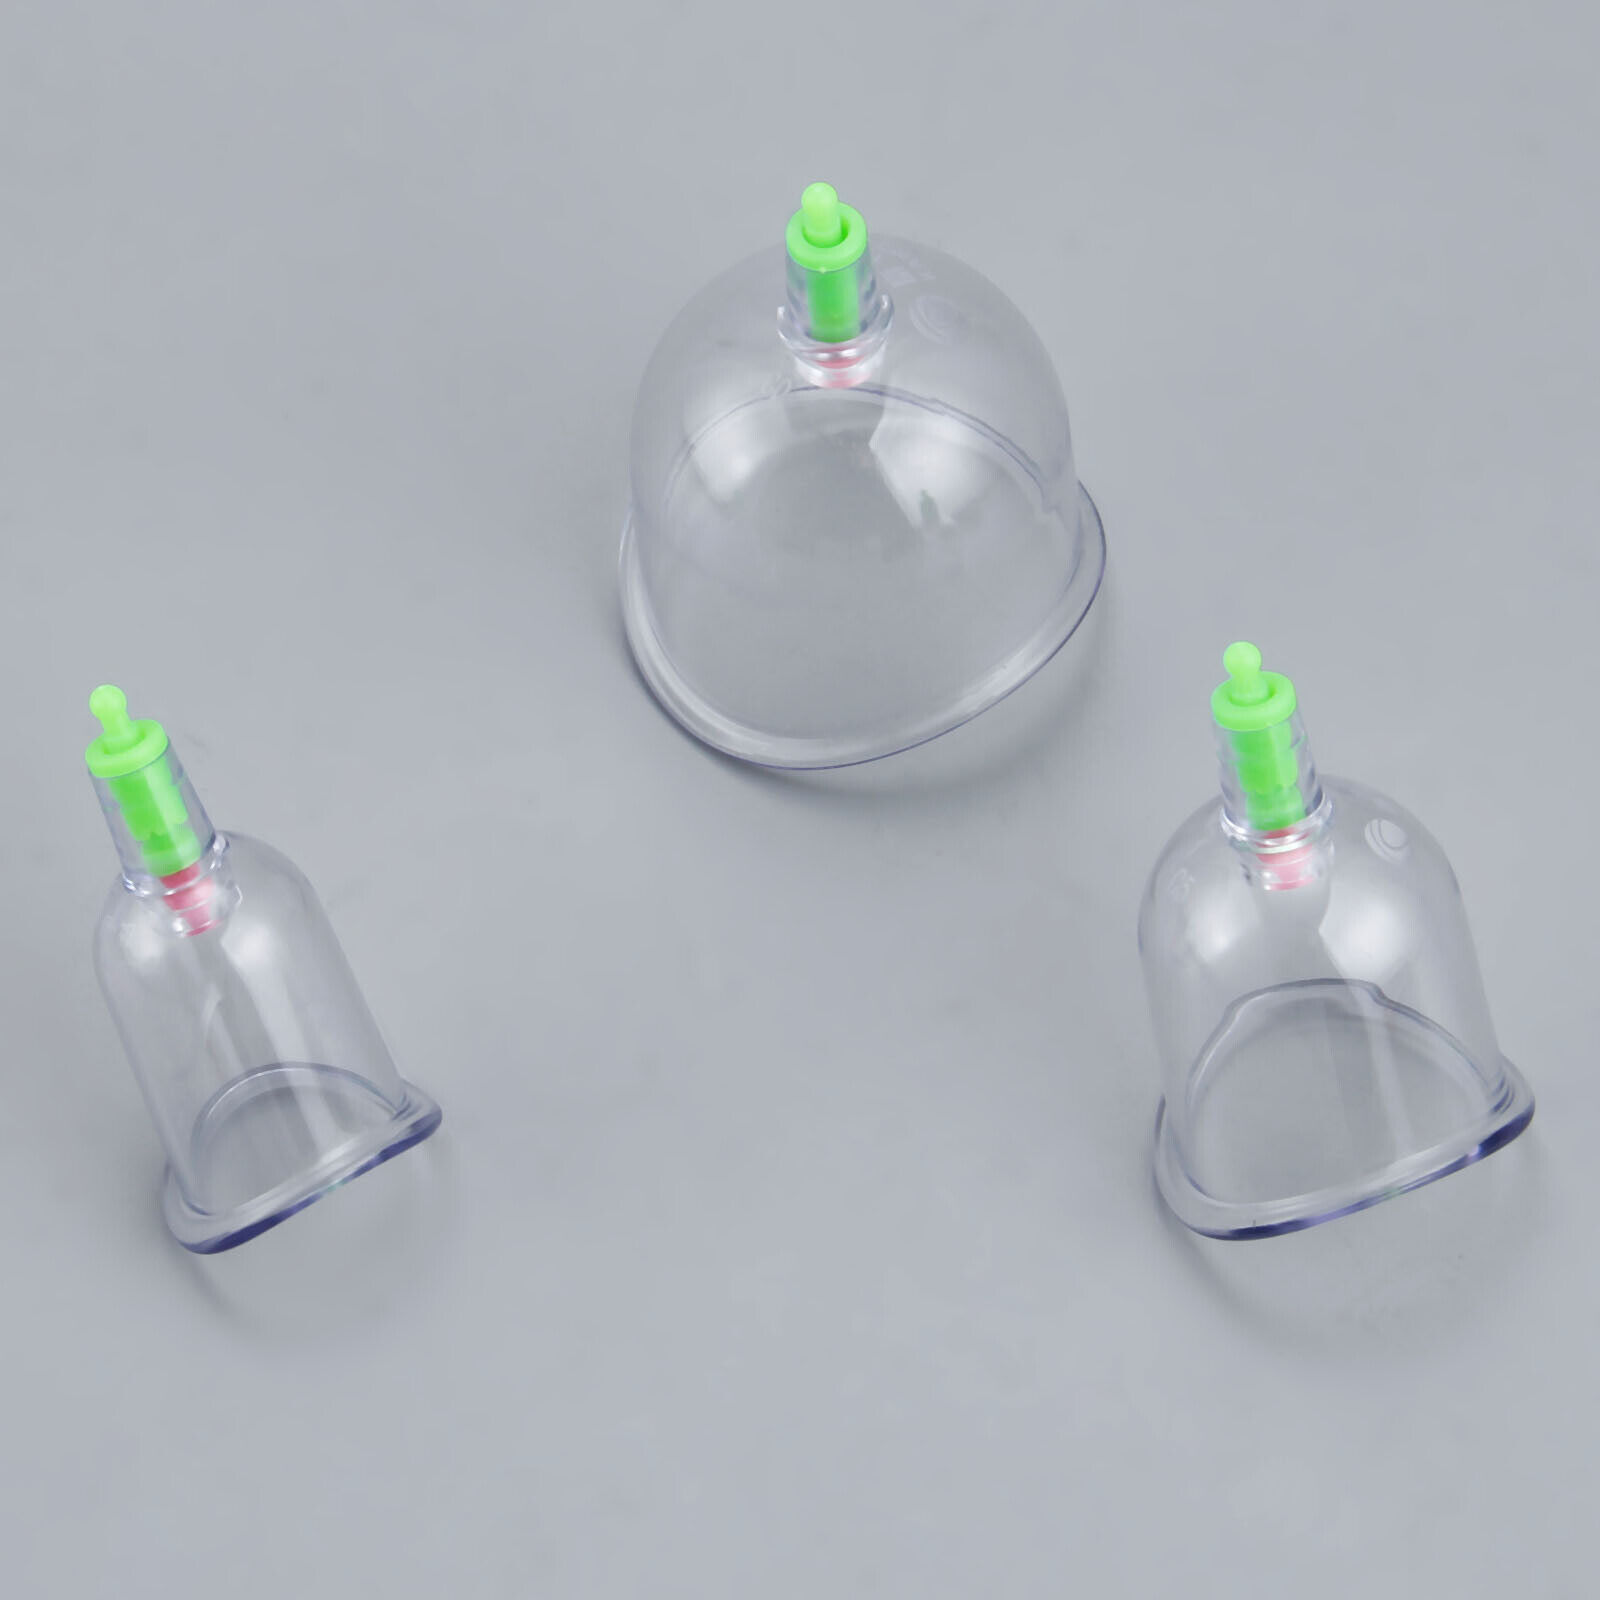 Curved Vacuum Cups Cupping Physical Therapy for Joints Arthritis Massage Set Unbranded/Generic Does Not Apply - фотография #6